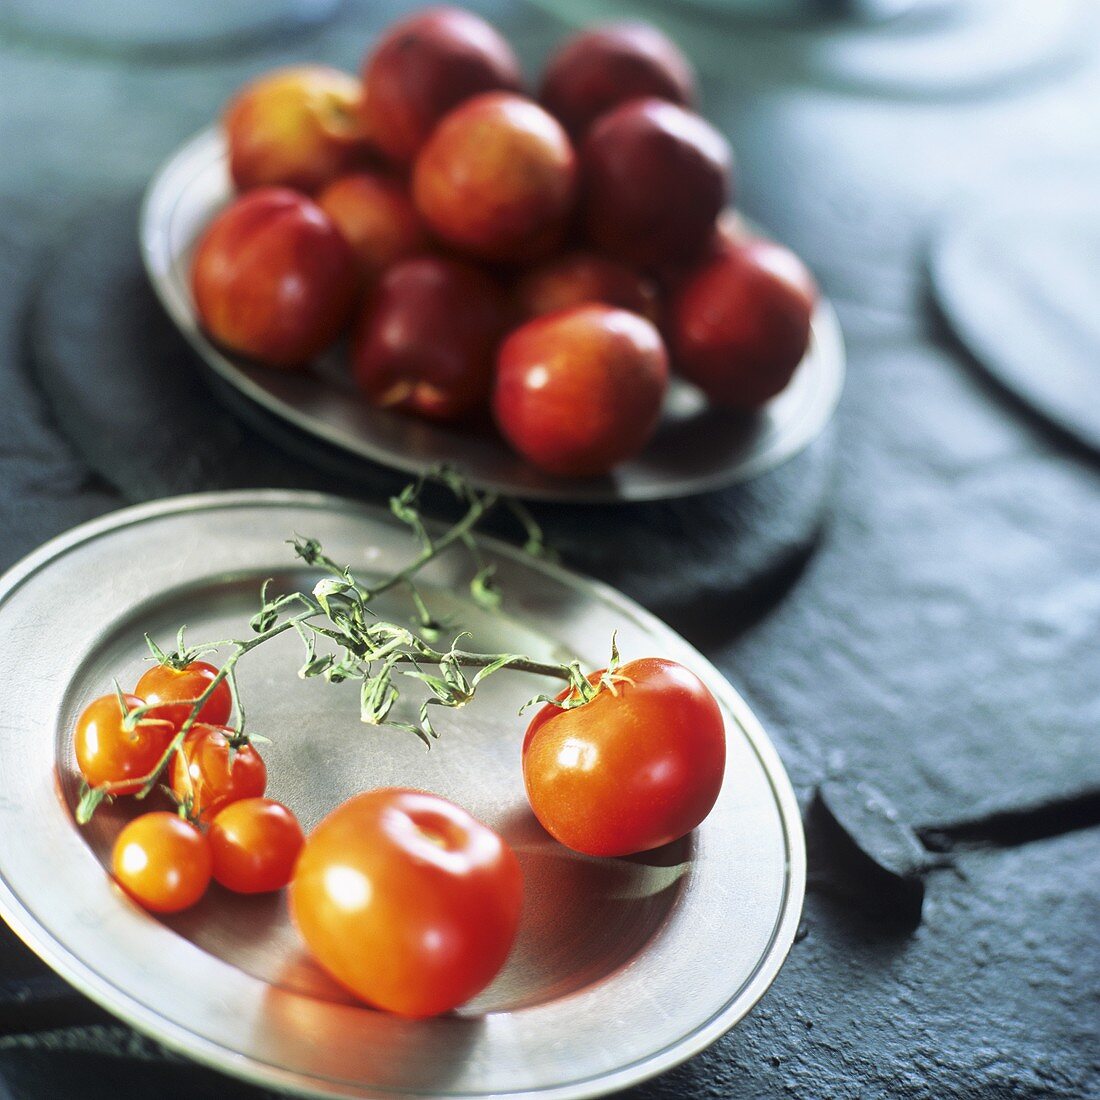 Tomatoes and plate of fruit